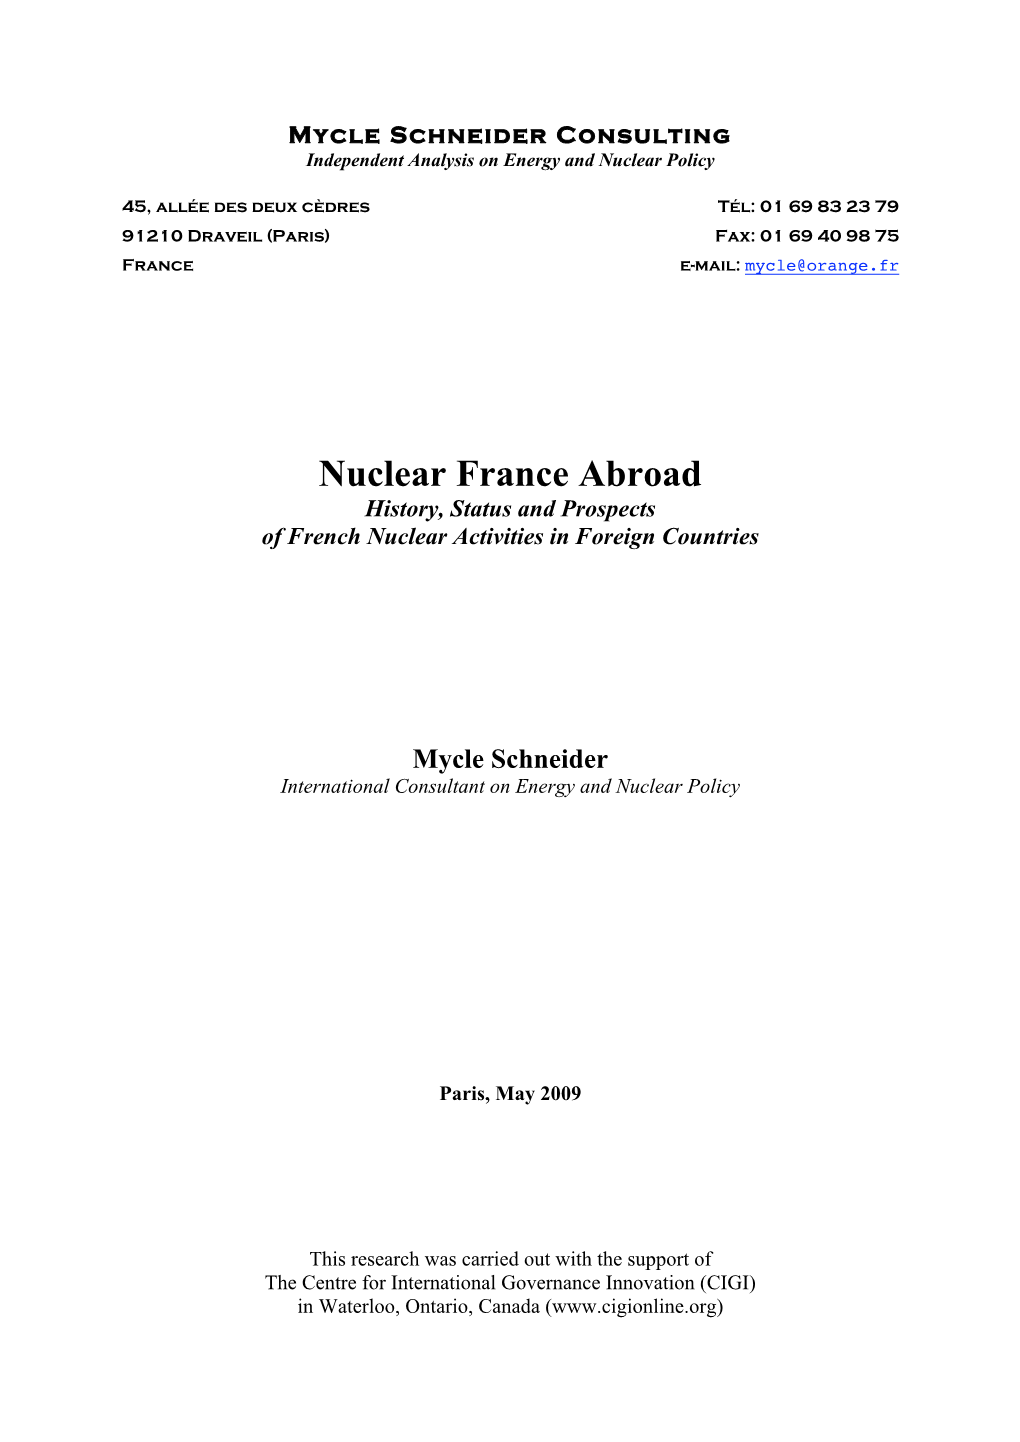 Nuclear France Abroad History, Status and Prospects of French Nuclear Activities in Foreign Countries